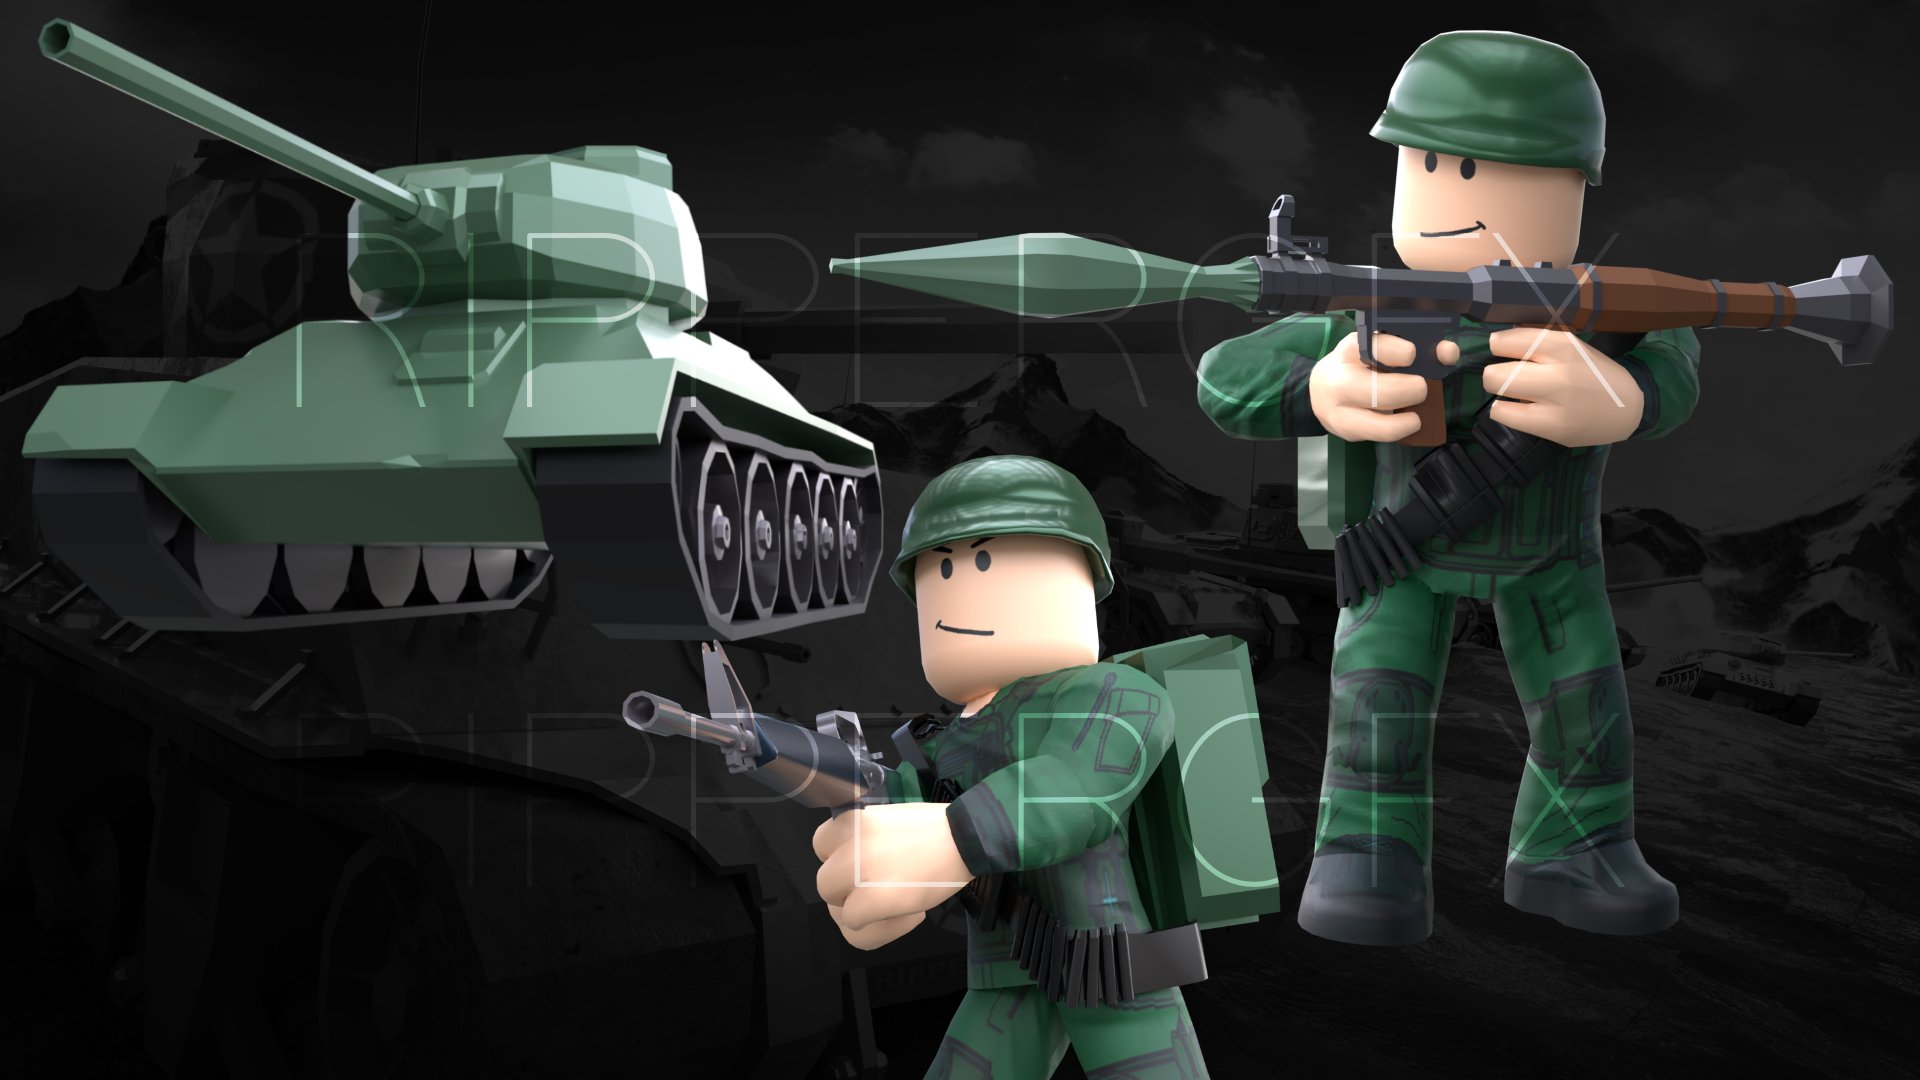 RipperGFX on X: Some simple renders for @UndoneBuilder 's War